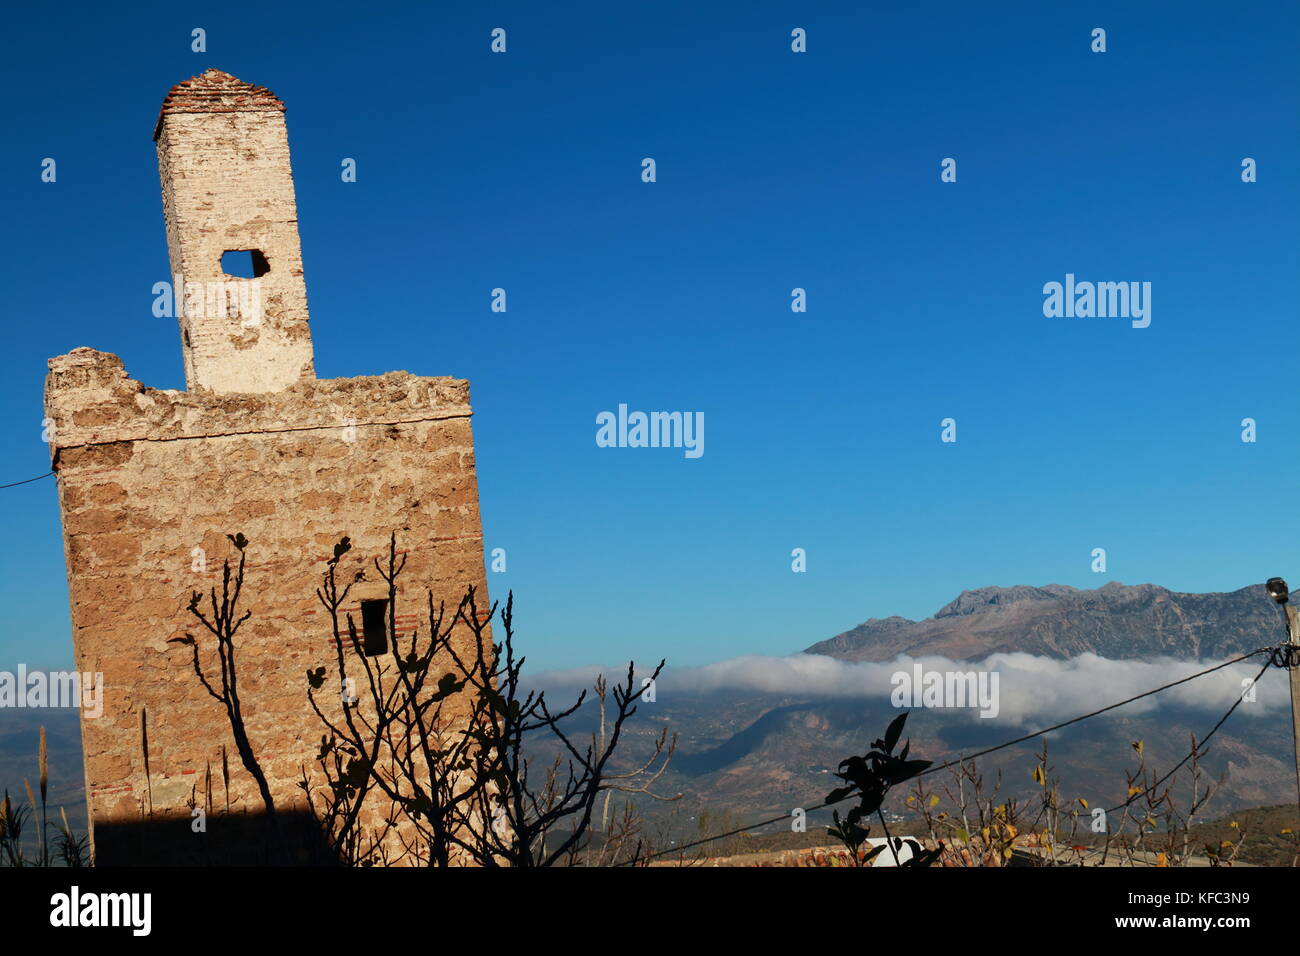 Inclined minaret of ancient mosque. Horizontal image. Stock Photo